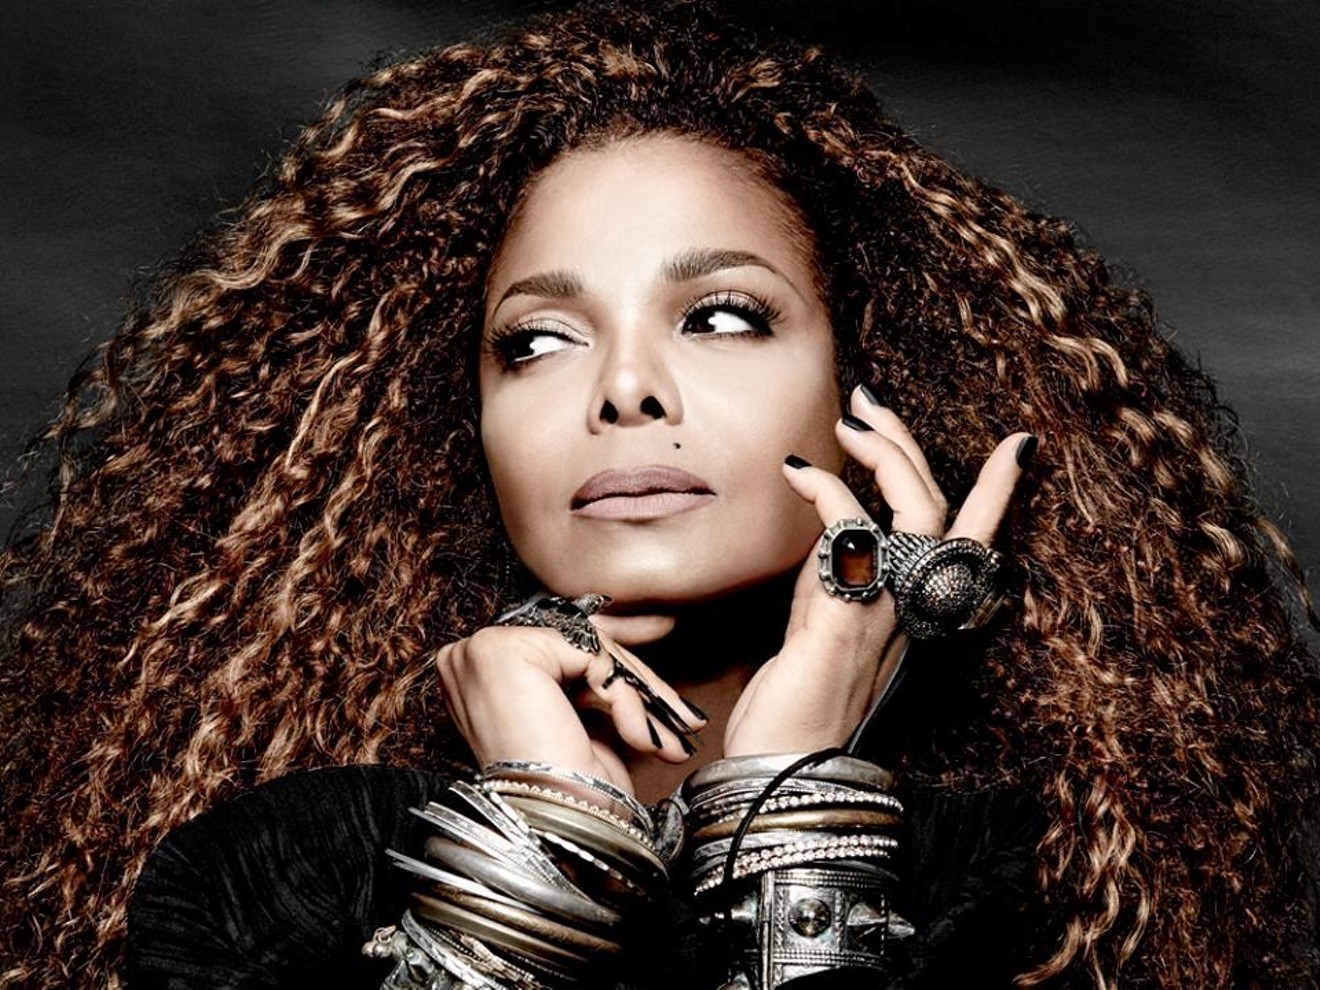 Janet Jackson announced a 56-city tour that will be stopping in Denver on October 17.